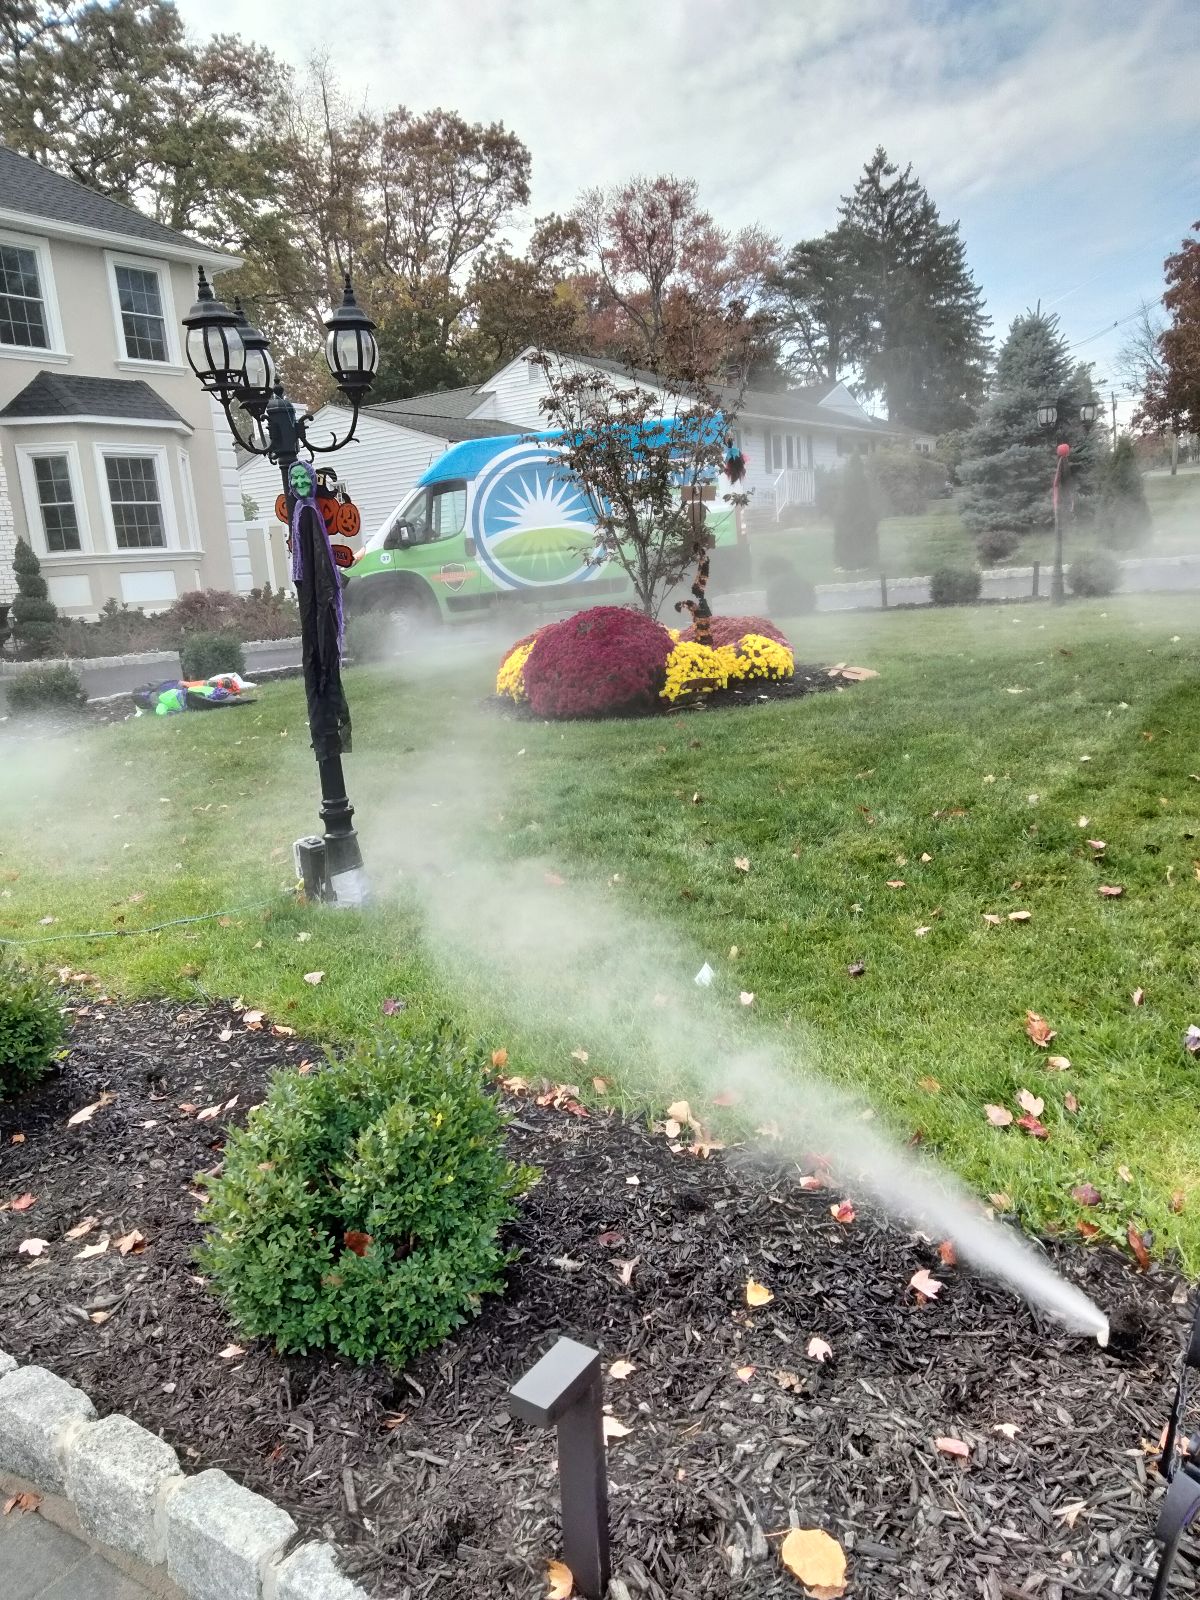 All Wet Irrigation, Lawn Care, & Lighting 795 Susquehanna Ave, Franklin Lakes New Jersey 07417